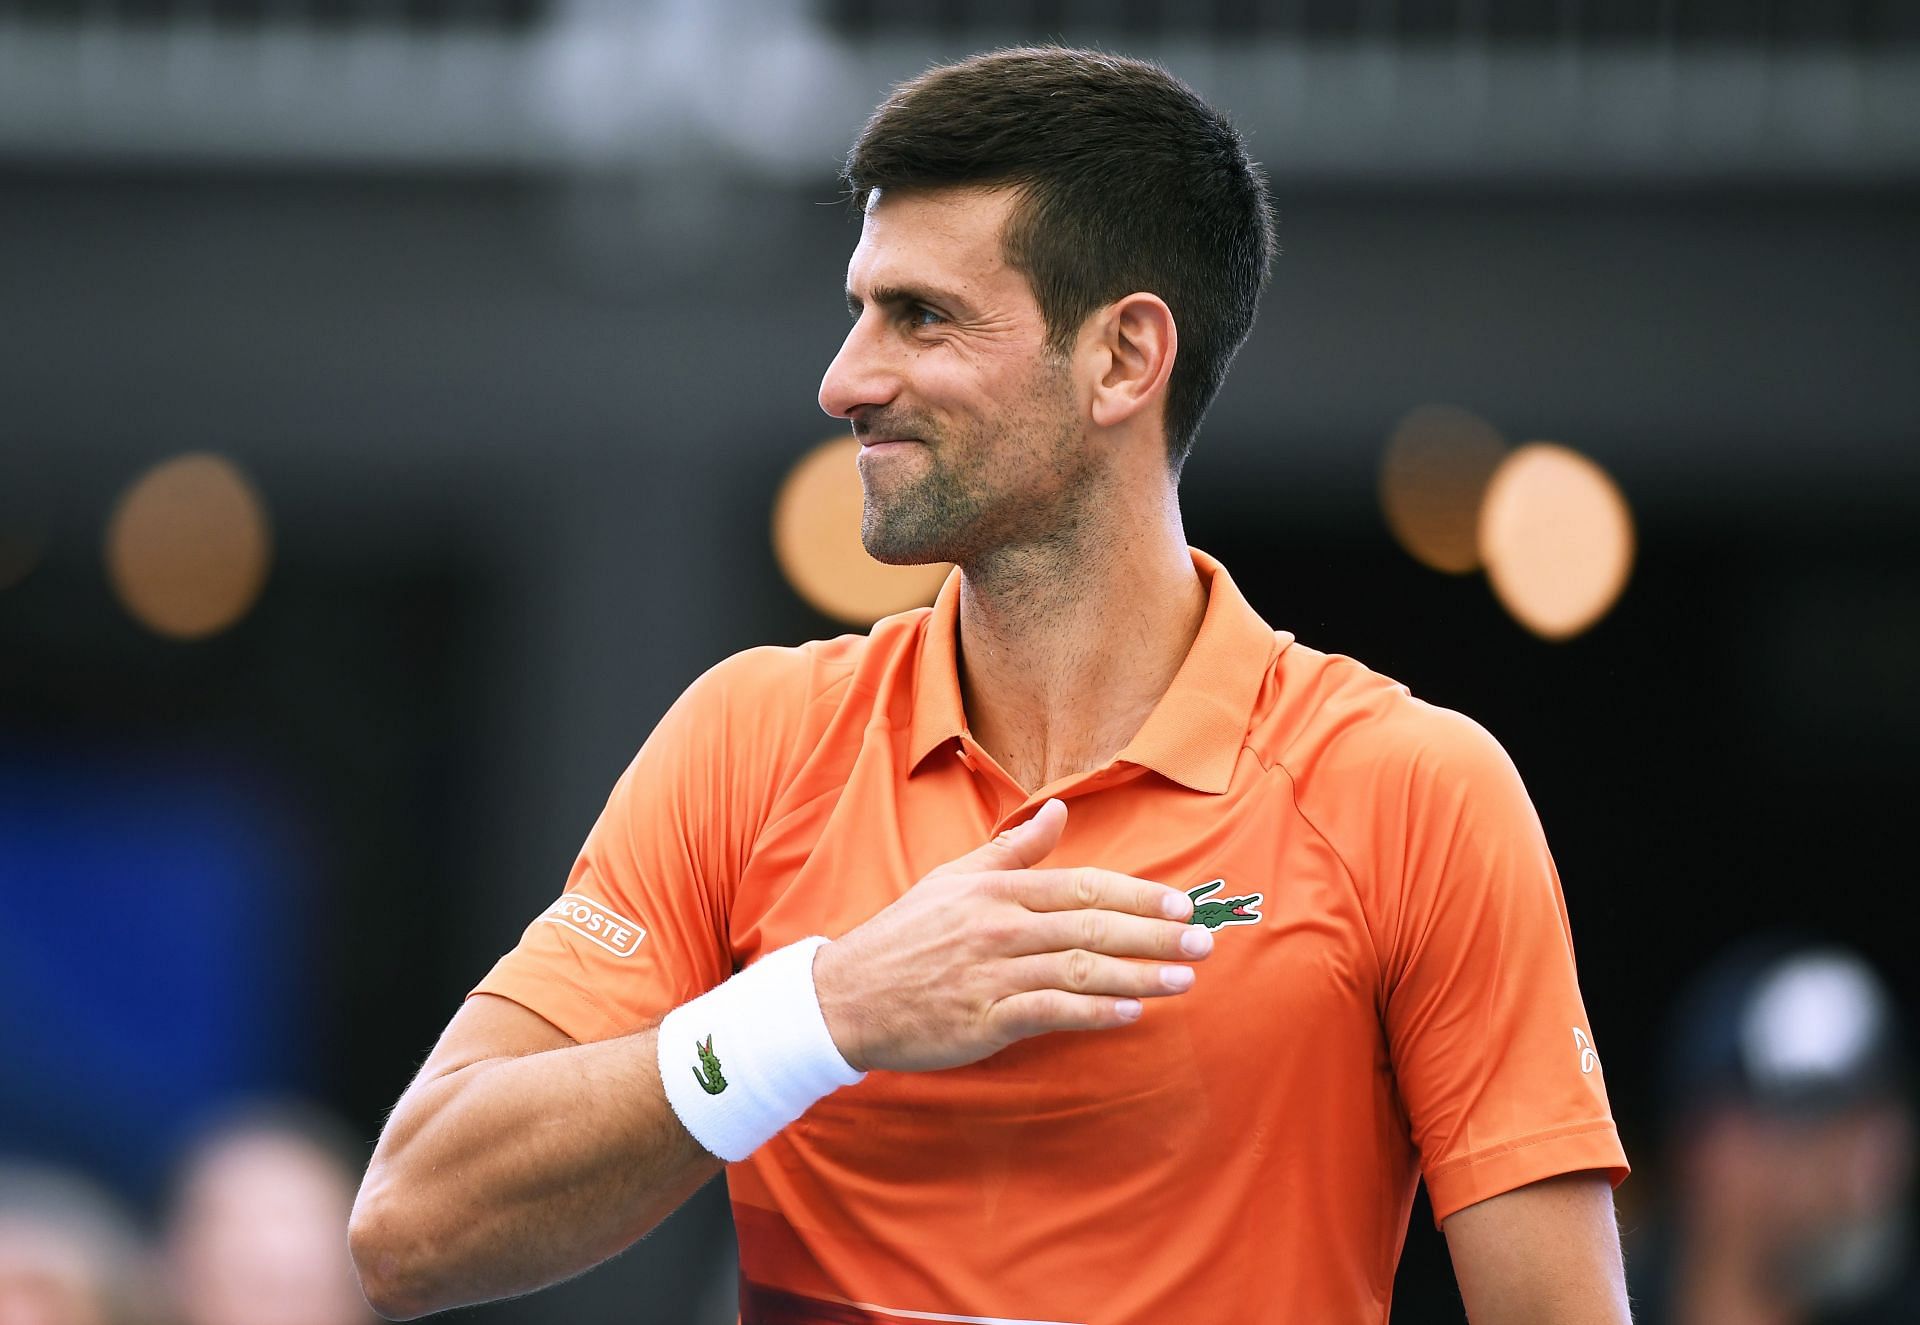 Novak Djokovic has booked his place in Round 2 at Adelaide International 1